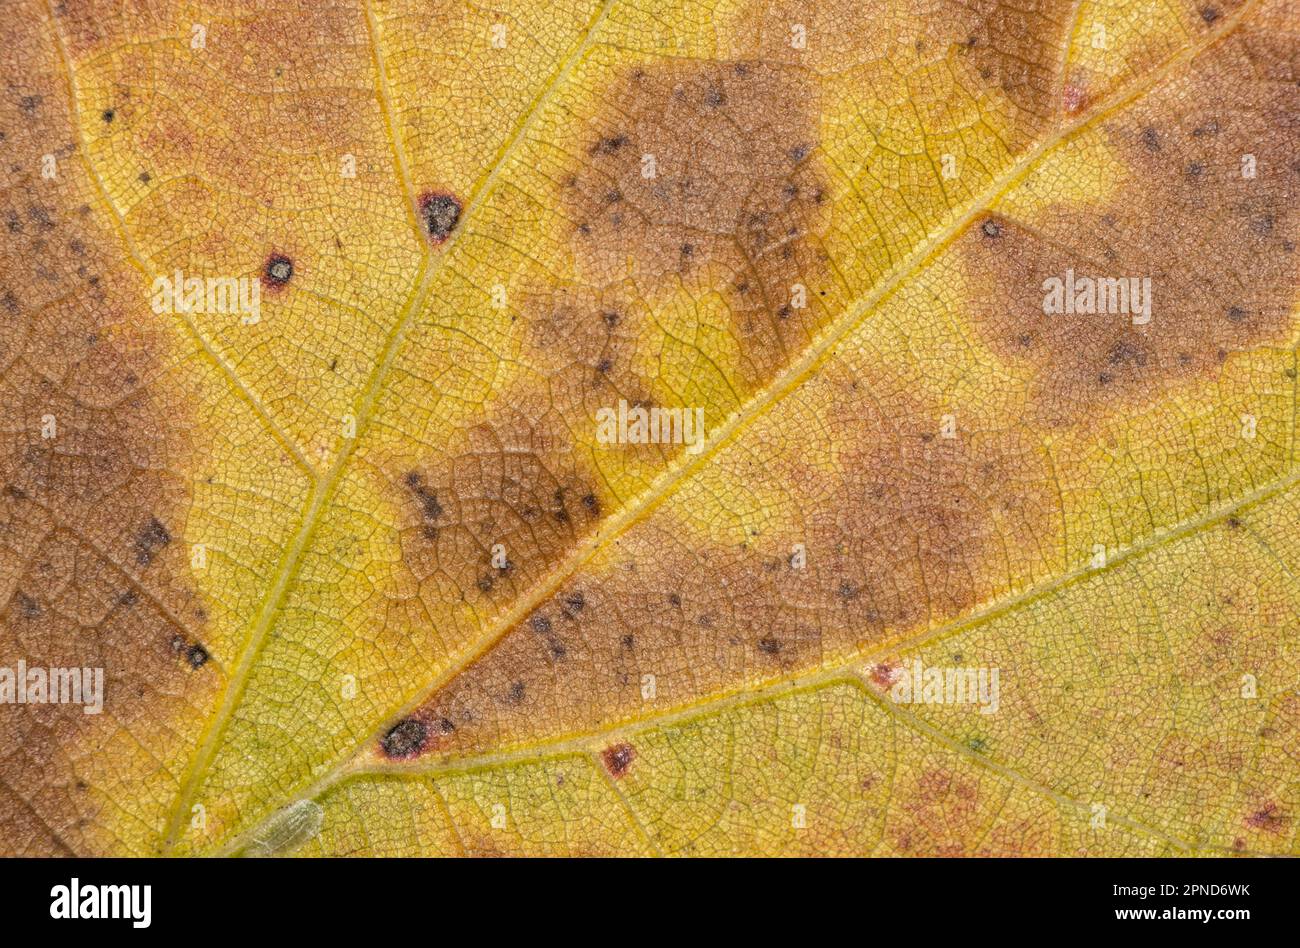 Single dead oak leaf, detailed macro with discoloration, markings and spots on surface area. Abstract fall leaves background image. Stock Photo